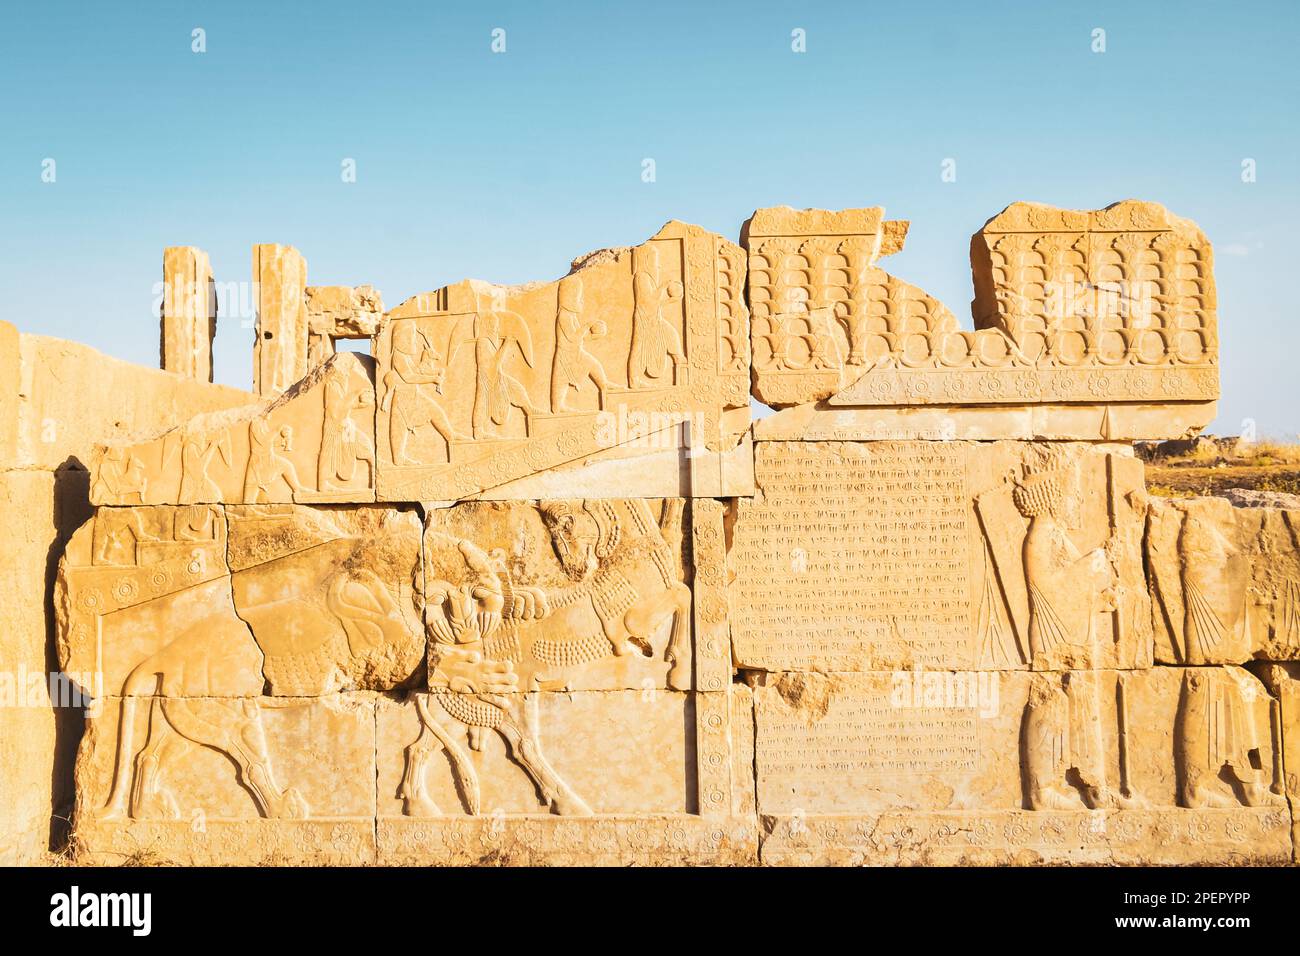 Persepolis, Iran - 8th june, 2022: The ancient tombs of Achaemenid dynasty Kings of Persia are carved in rocky cliff in Naqsh-e Rustam, Iran Stock Photo